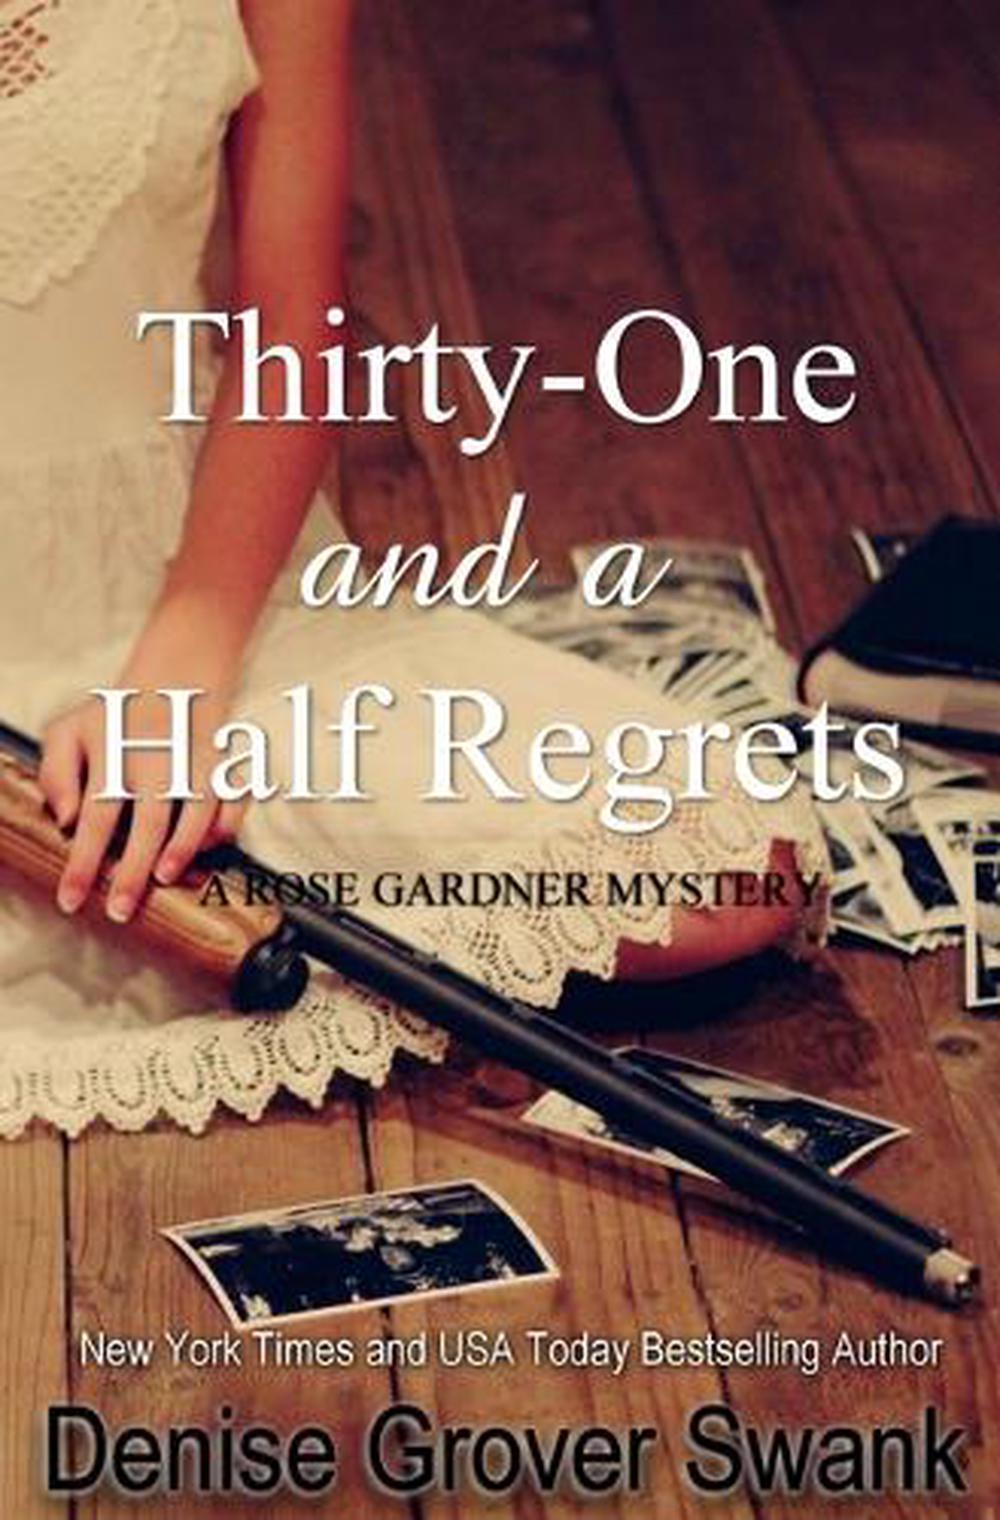 ThirtyOne and a Half Regrets Rose Gardner Mystery by Denise Grover